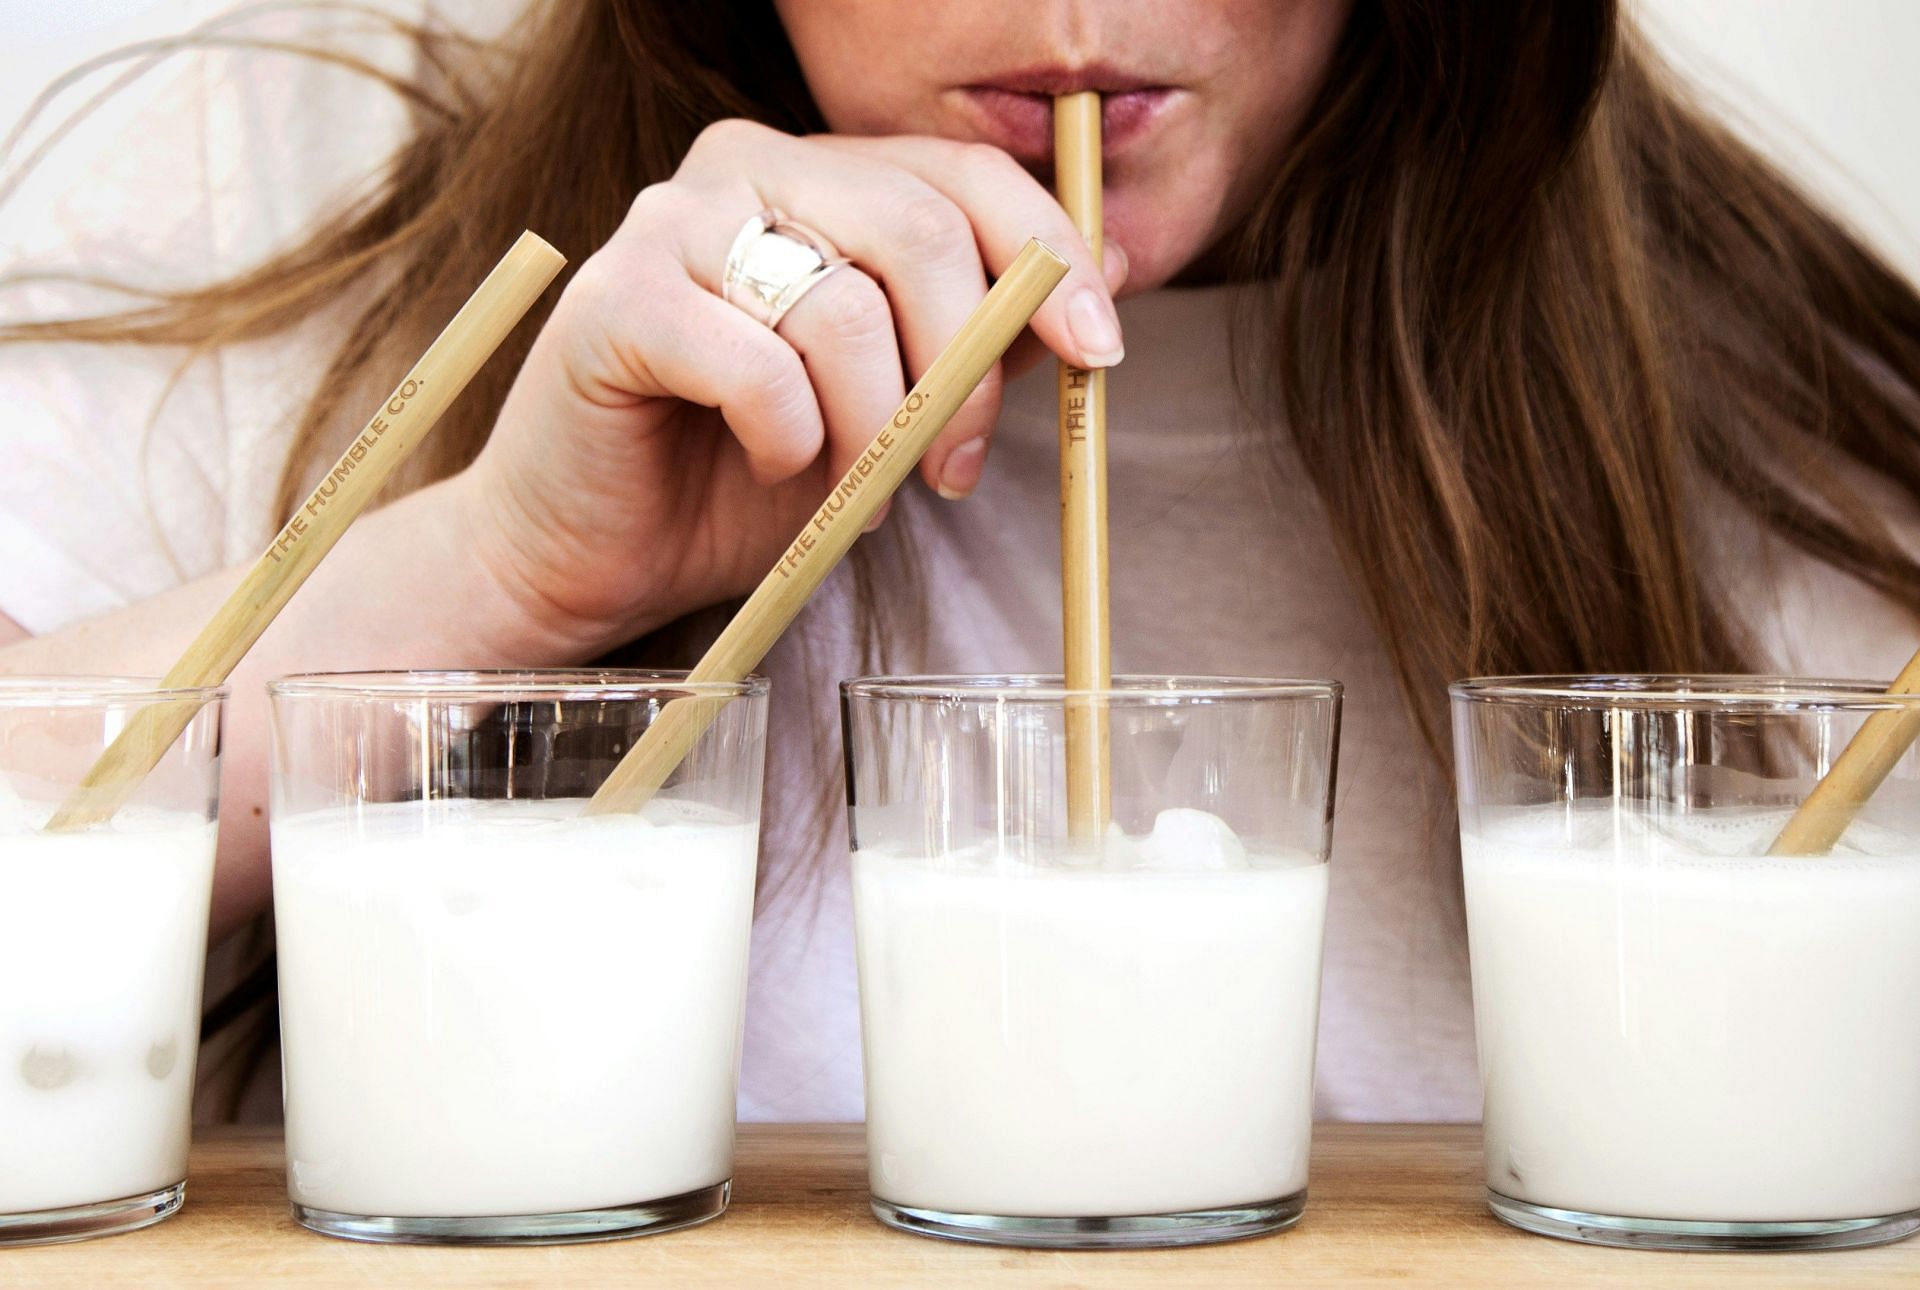 Choose A2 milk with closed eyes (Image by The Humble Co./Unsplash)